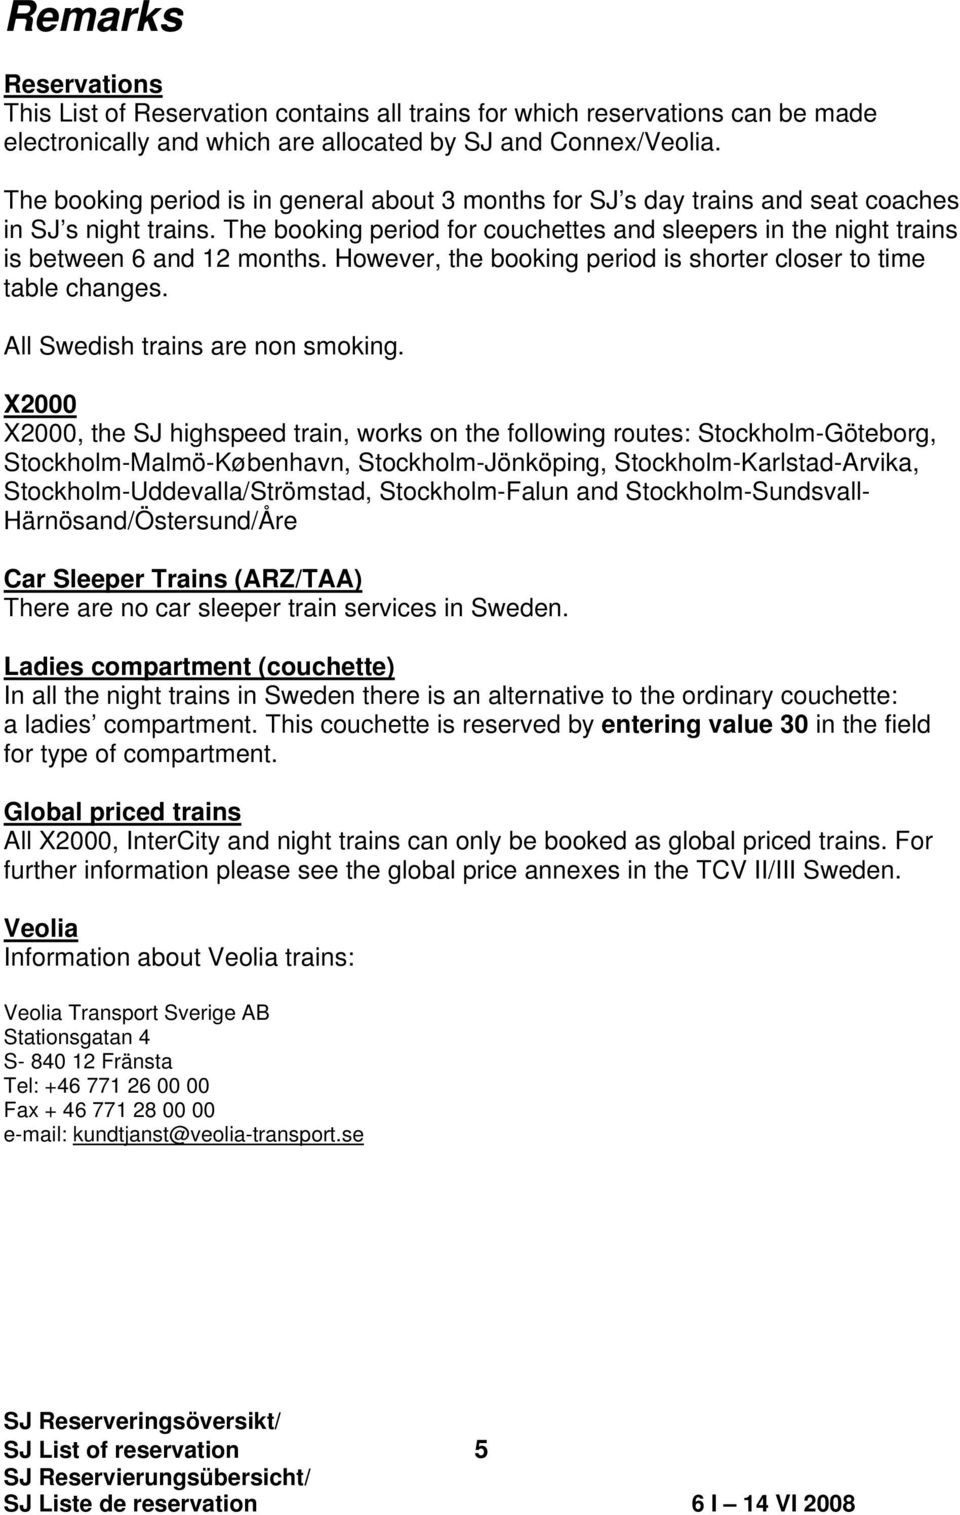 The booking period for couchettes and sleepers in the night trains is between 6 and 12 months. However, the booking period is shorter closer to time table changes. All Swedish trains are non smoking.